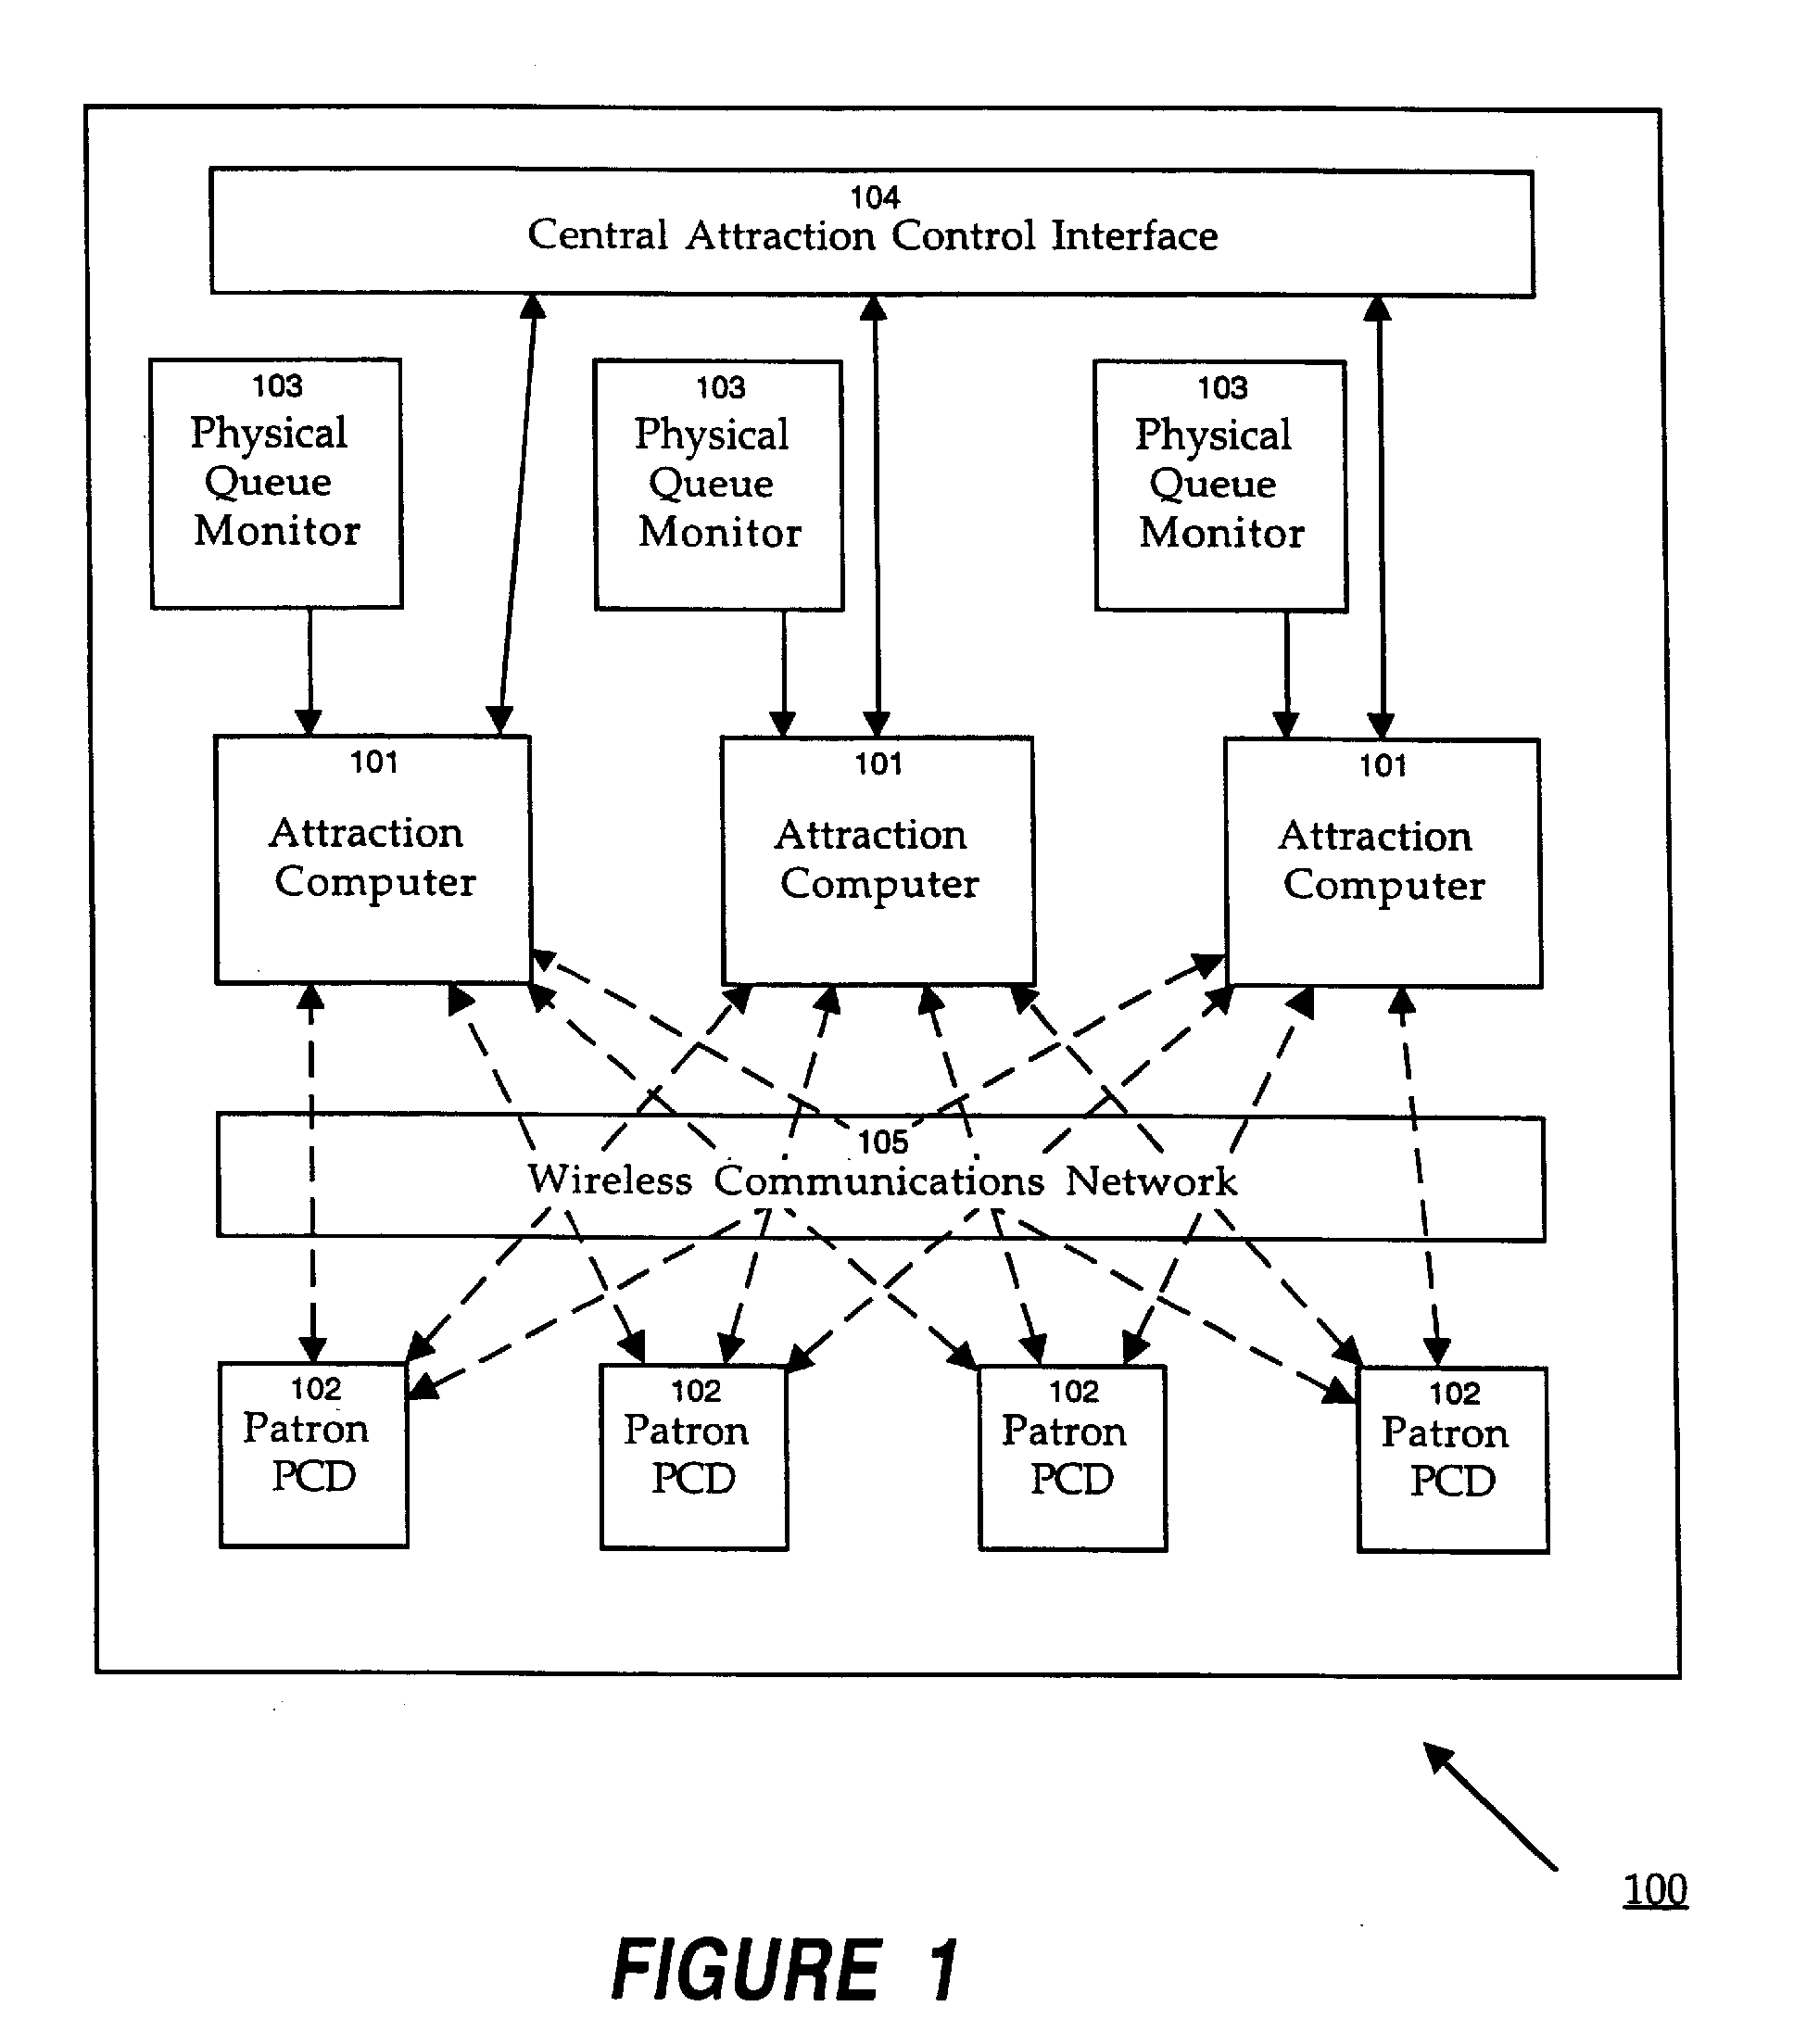 Assigning and Managing Patron Reservations for Distributed Services Using Wireless Personal Communication Devices